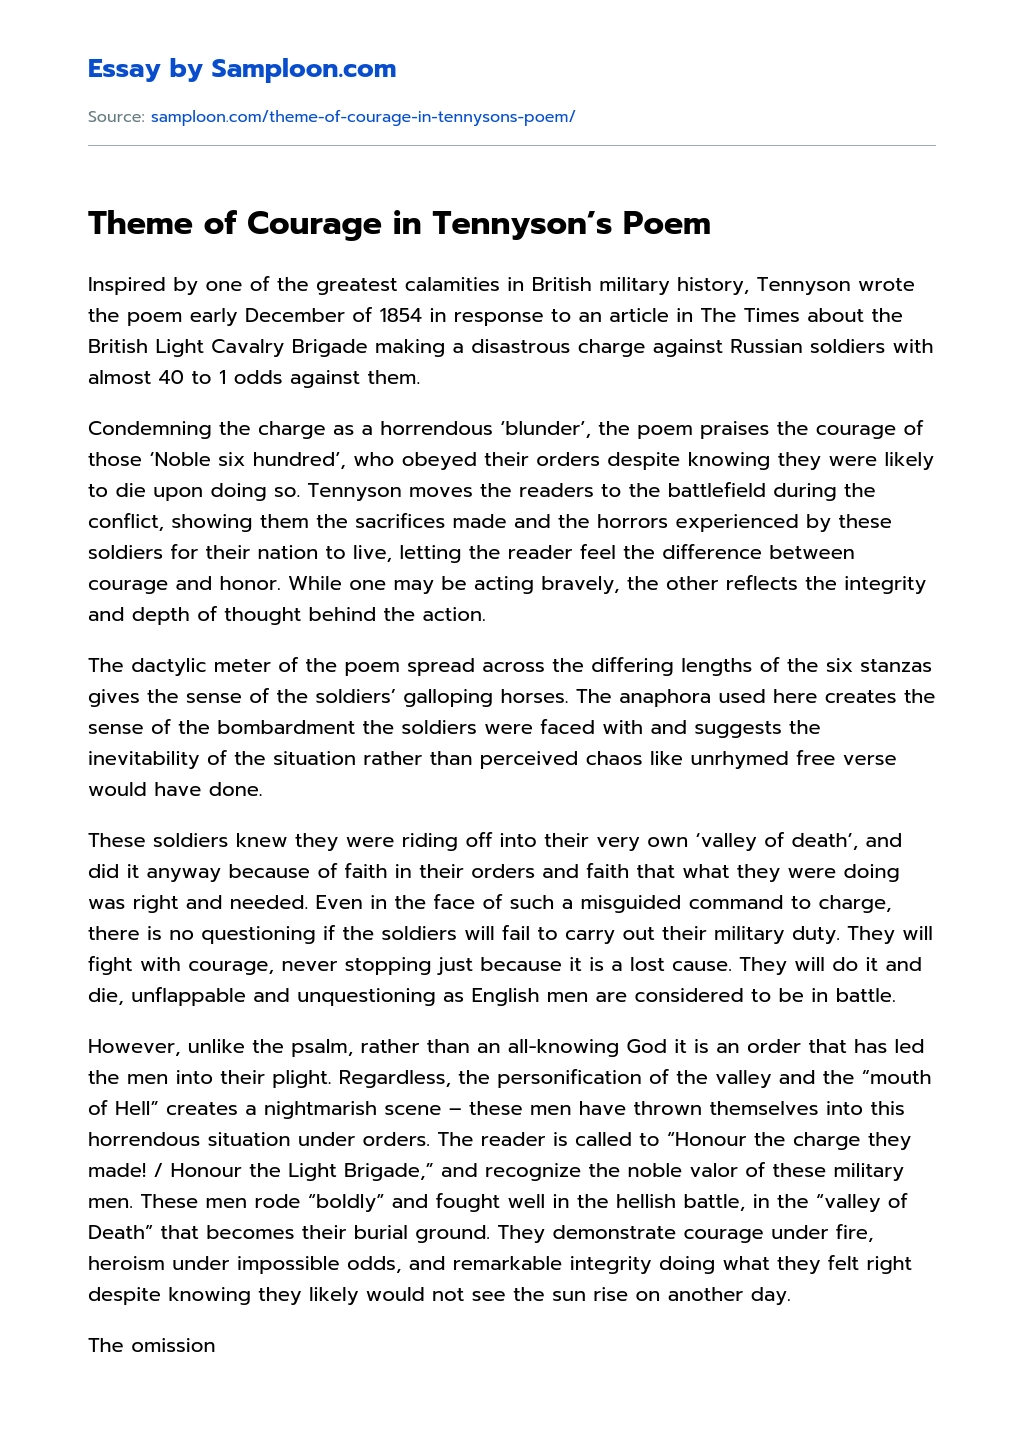 Theme of Courage in Tennyson’s Poem essay